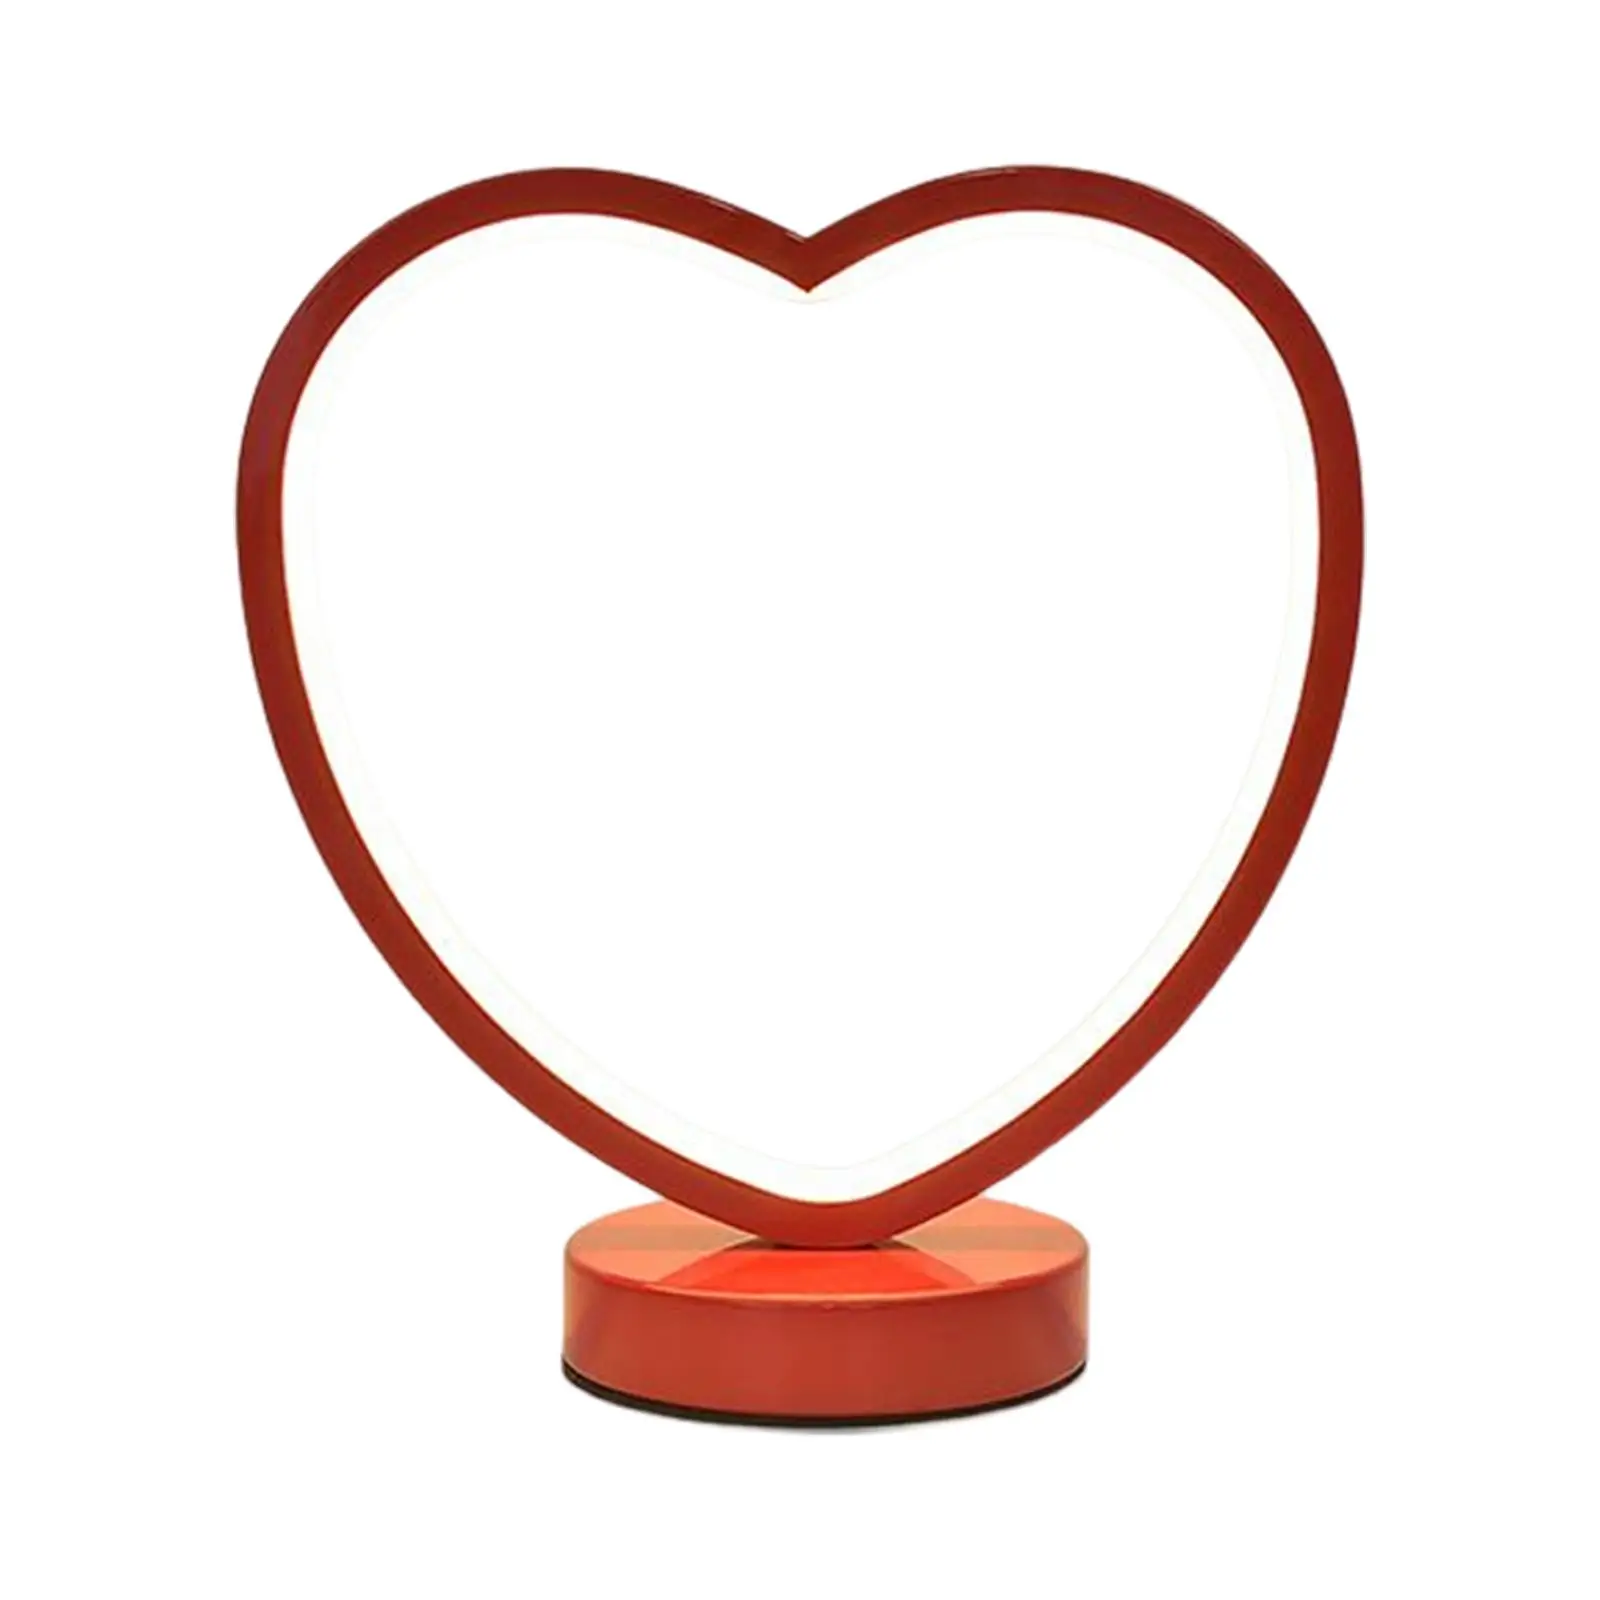 Heart Shape Desk Light Decorative Night Lights Red Frame Warm White Metal Modern Table Lamp for Guest Room Wedding New Year